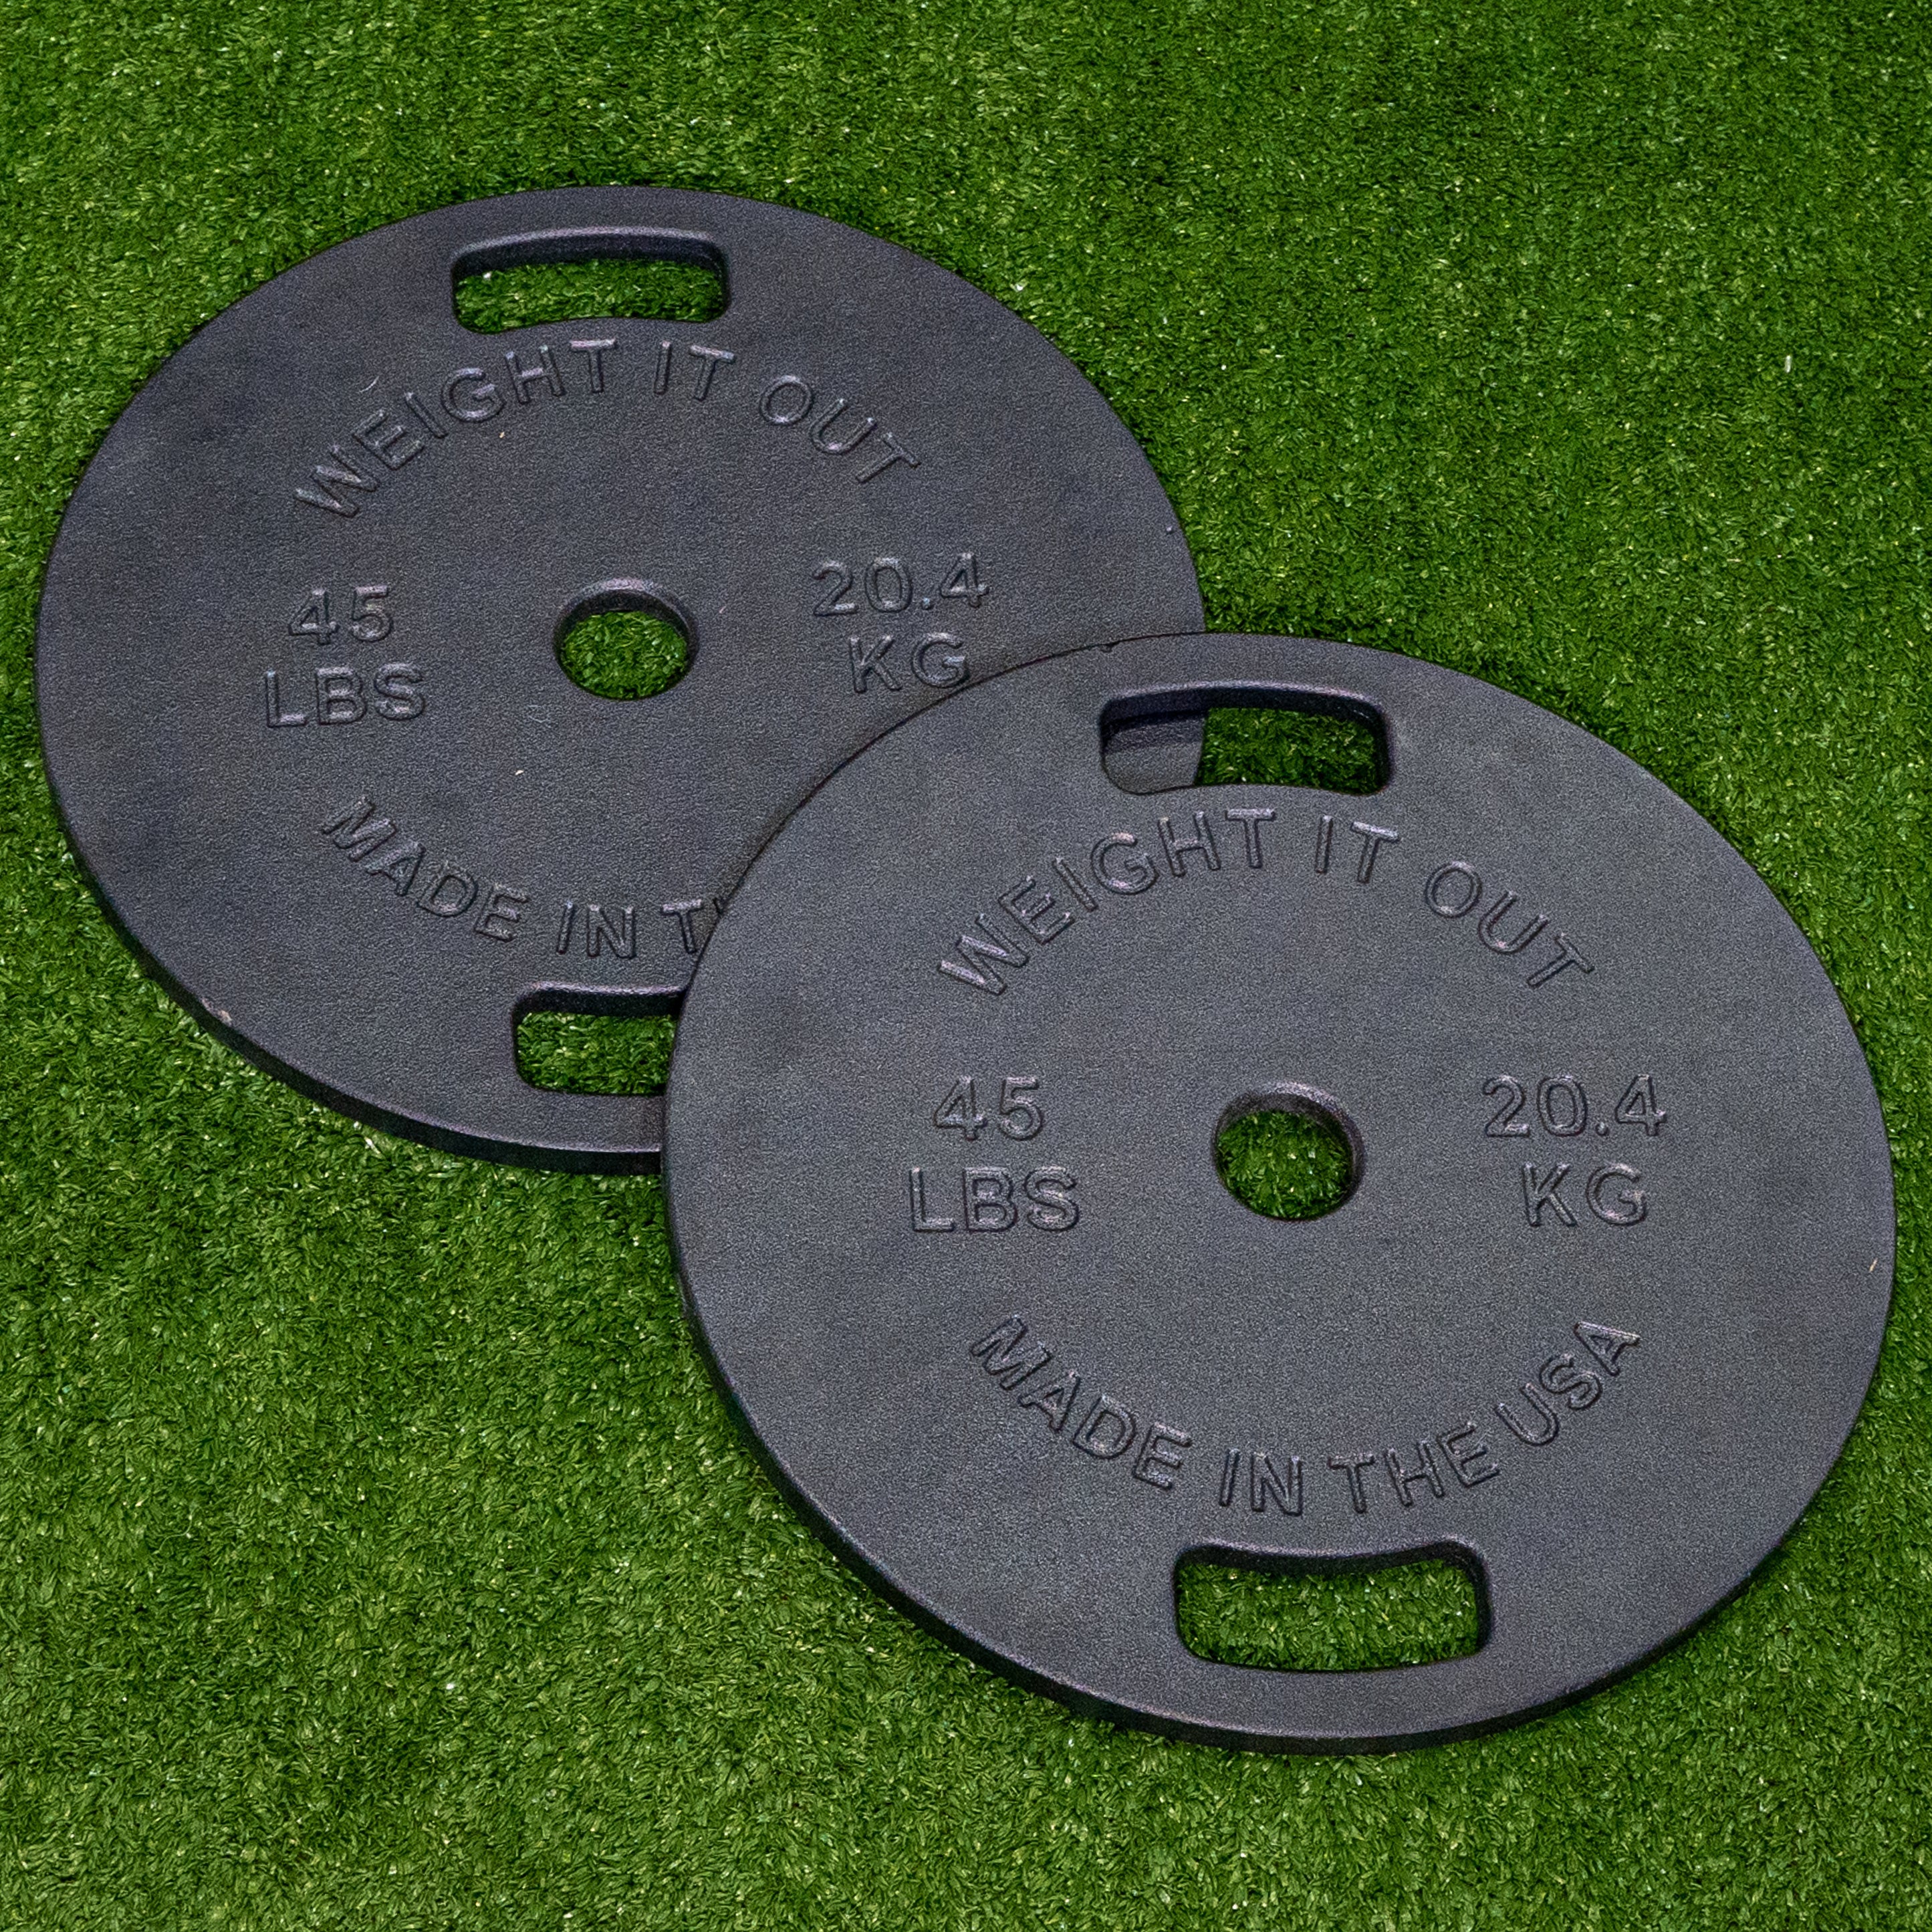 45 LB Cast Iron Olympic Weight Plates (Pair)